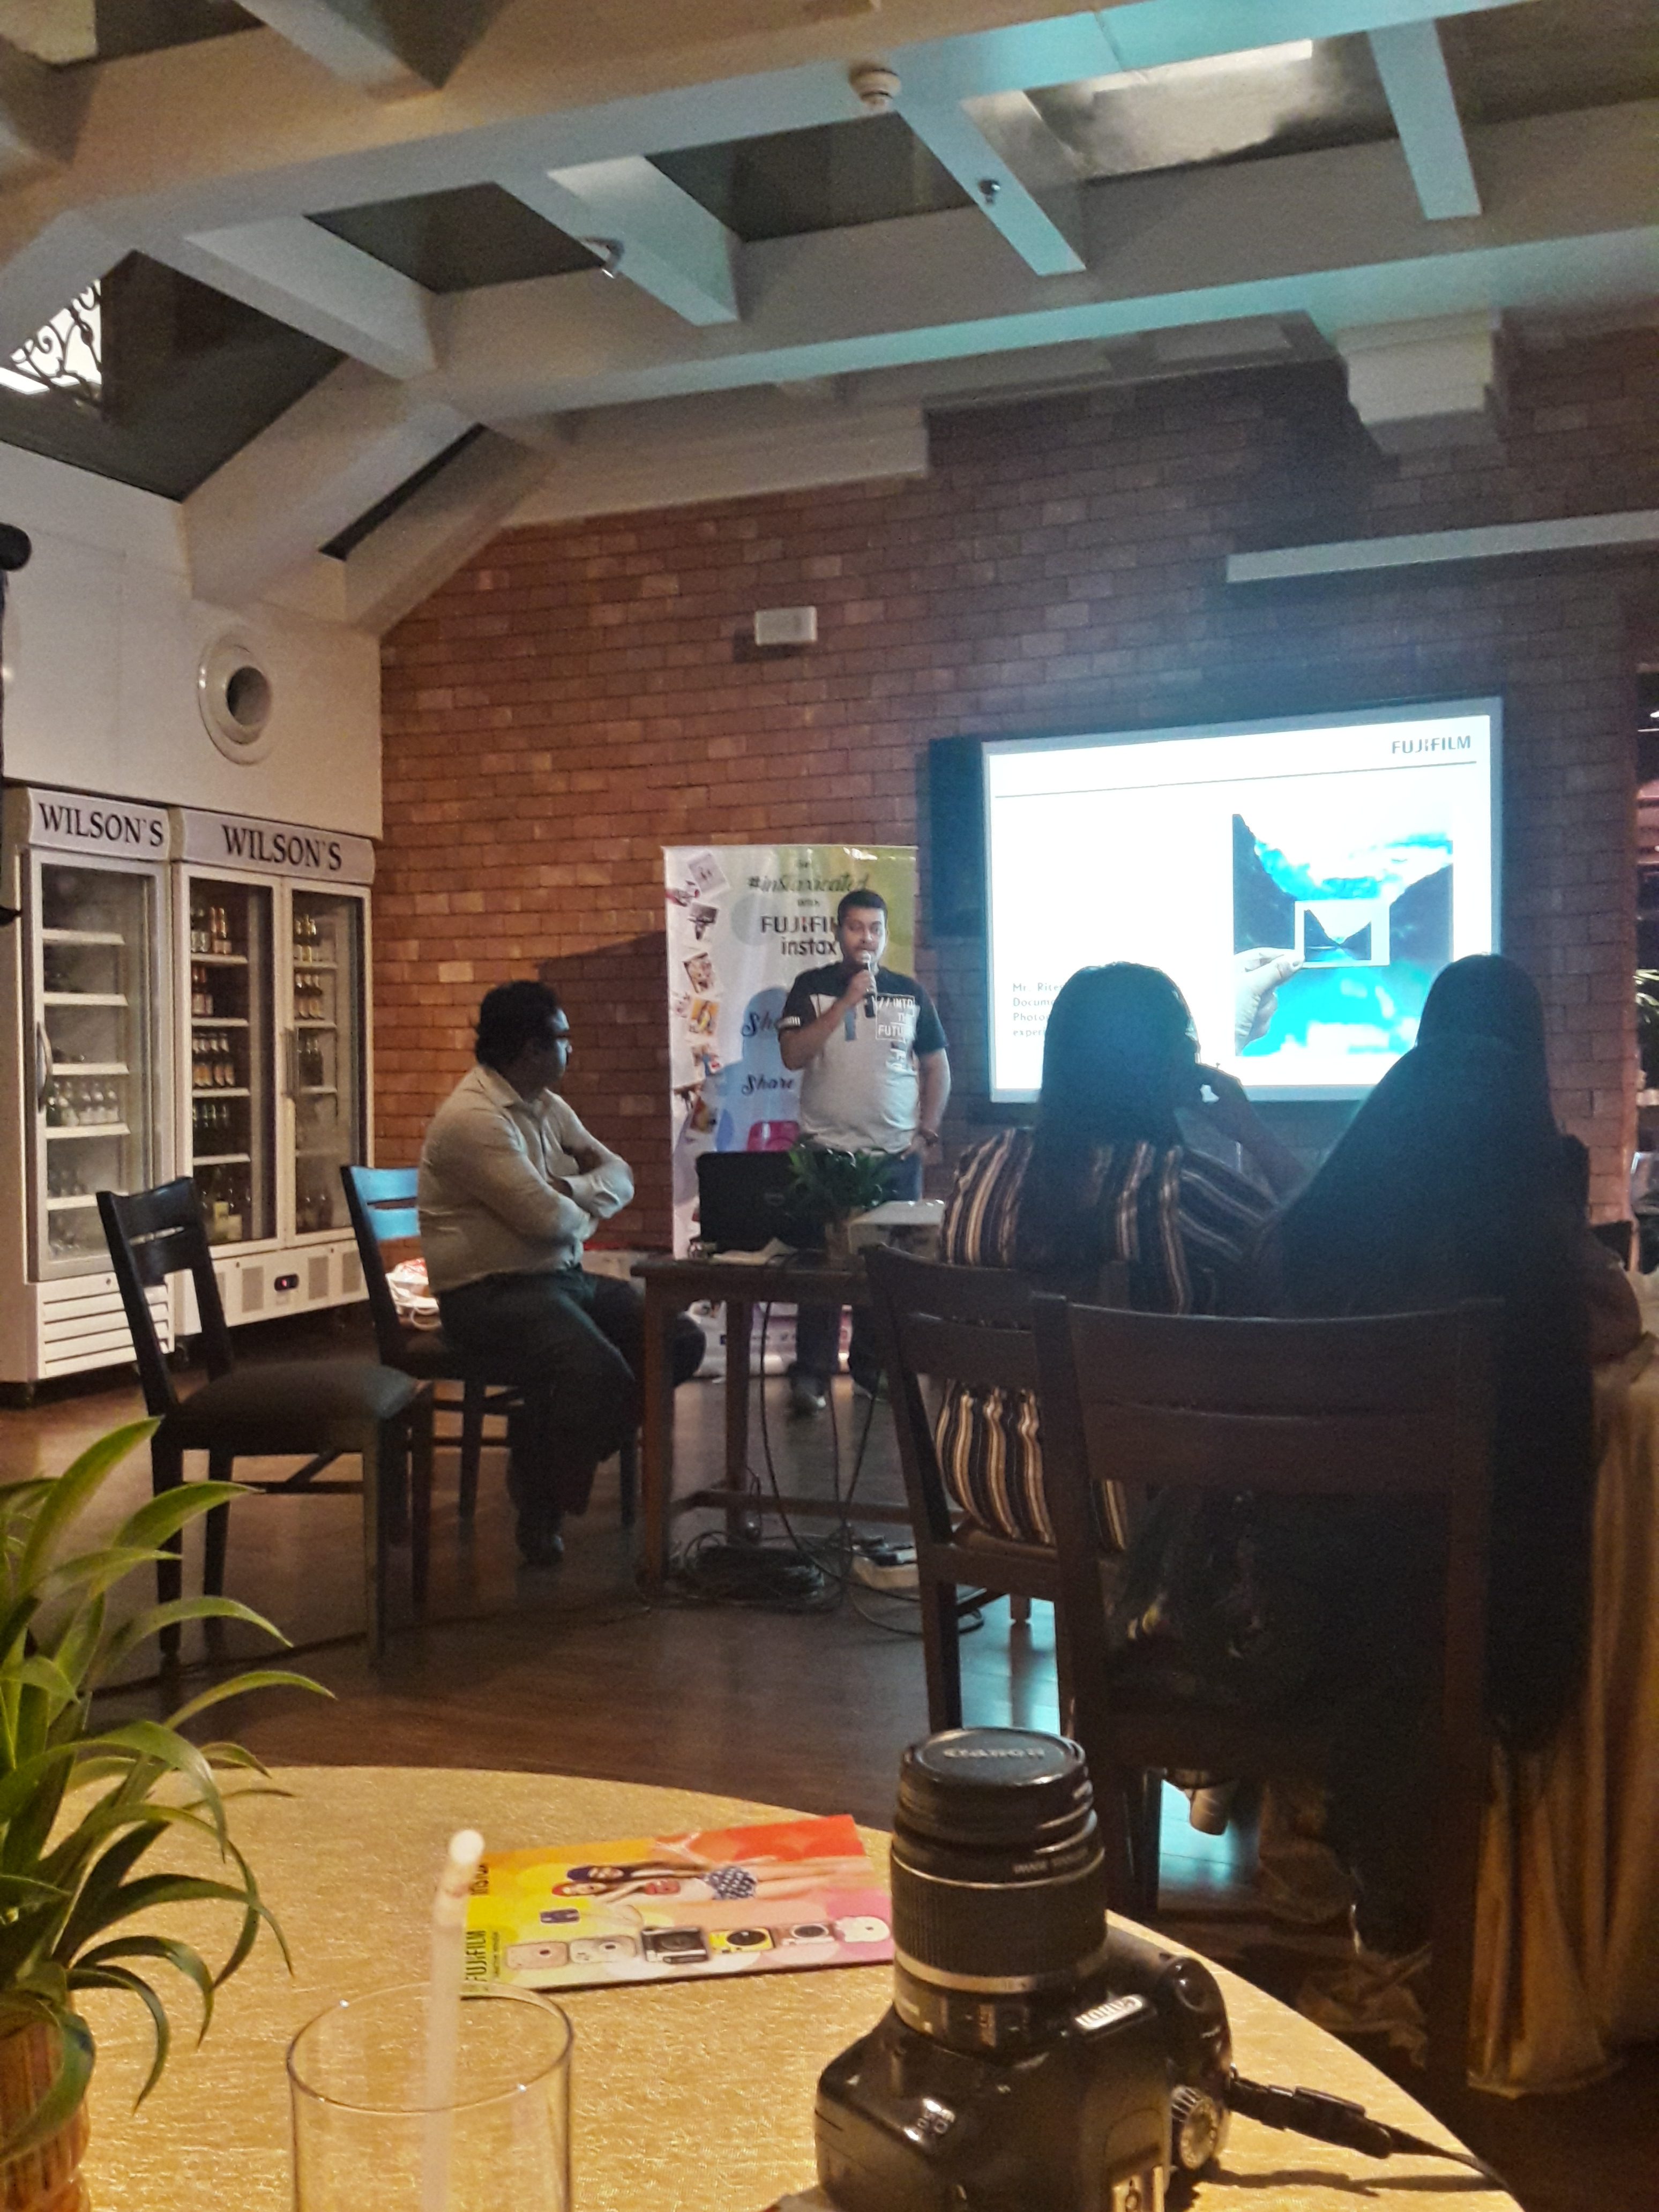 Got #instaxicated with Fujifilm Instax- Kolkata Bloggers' Meet | Cherry On Top